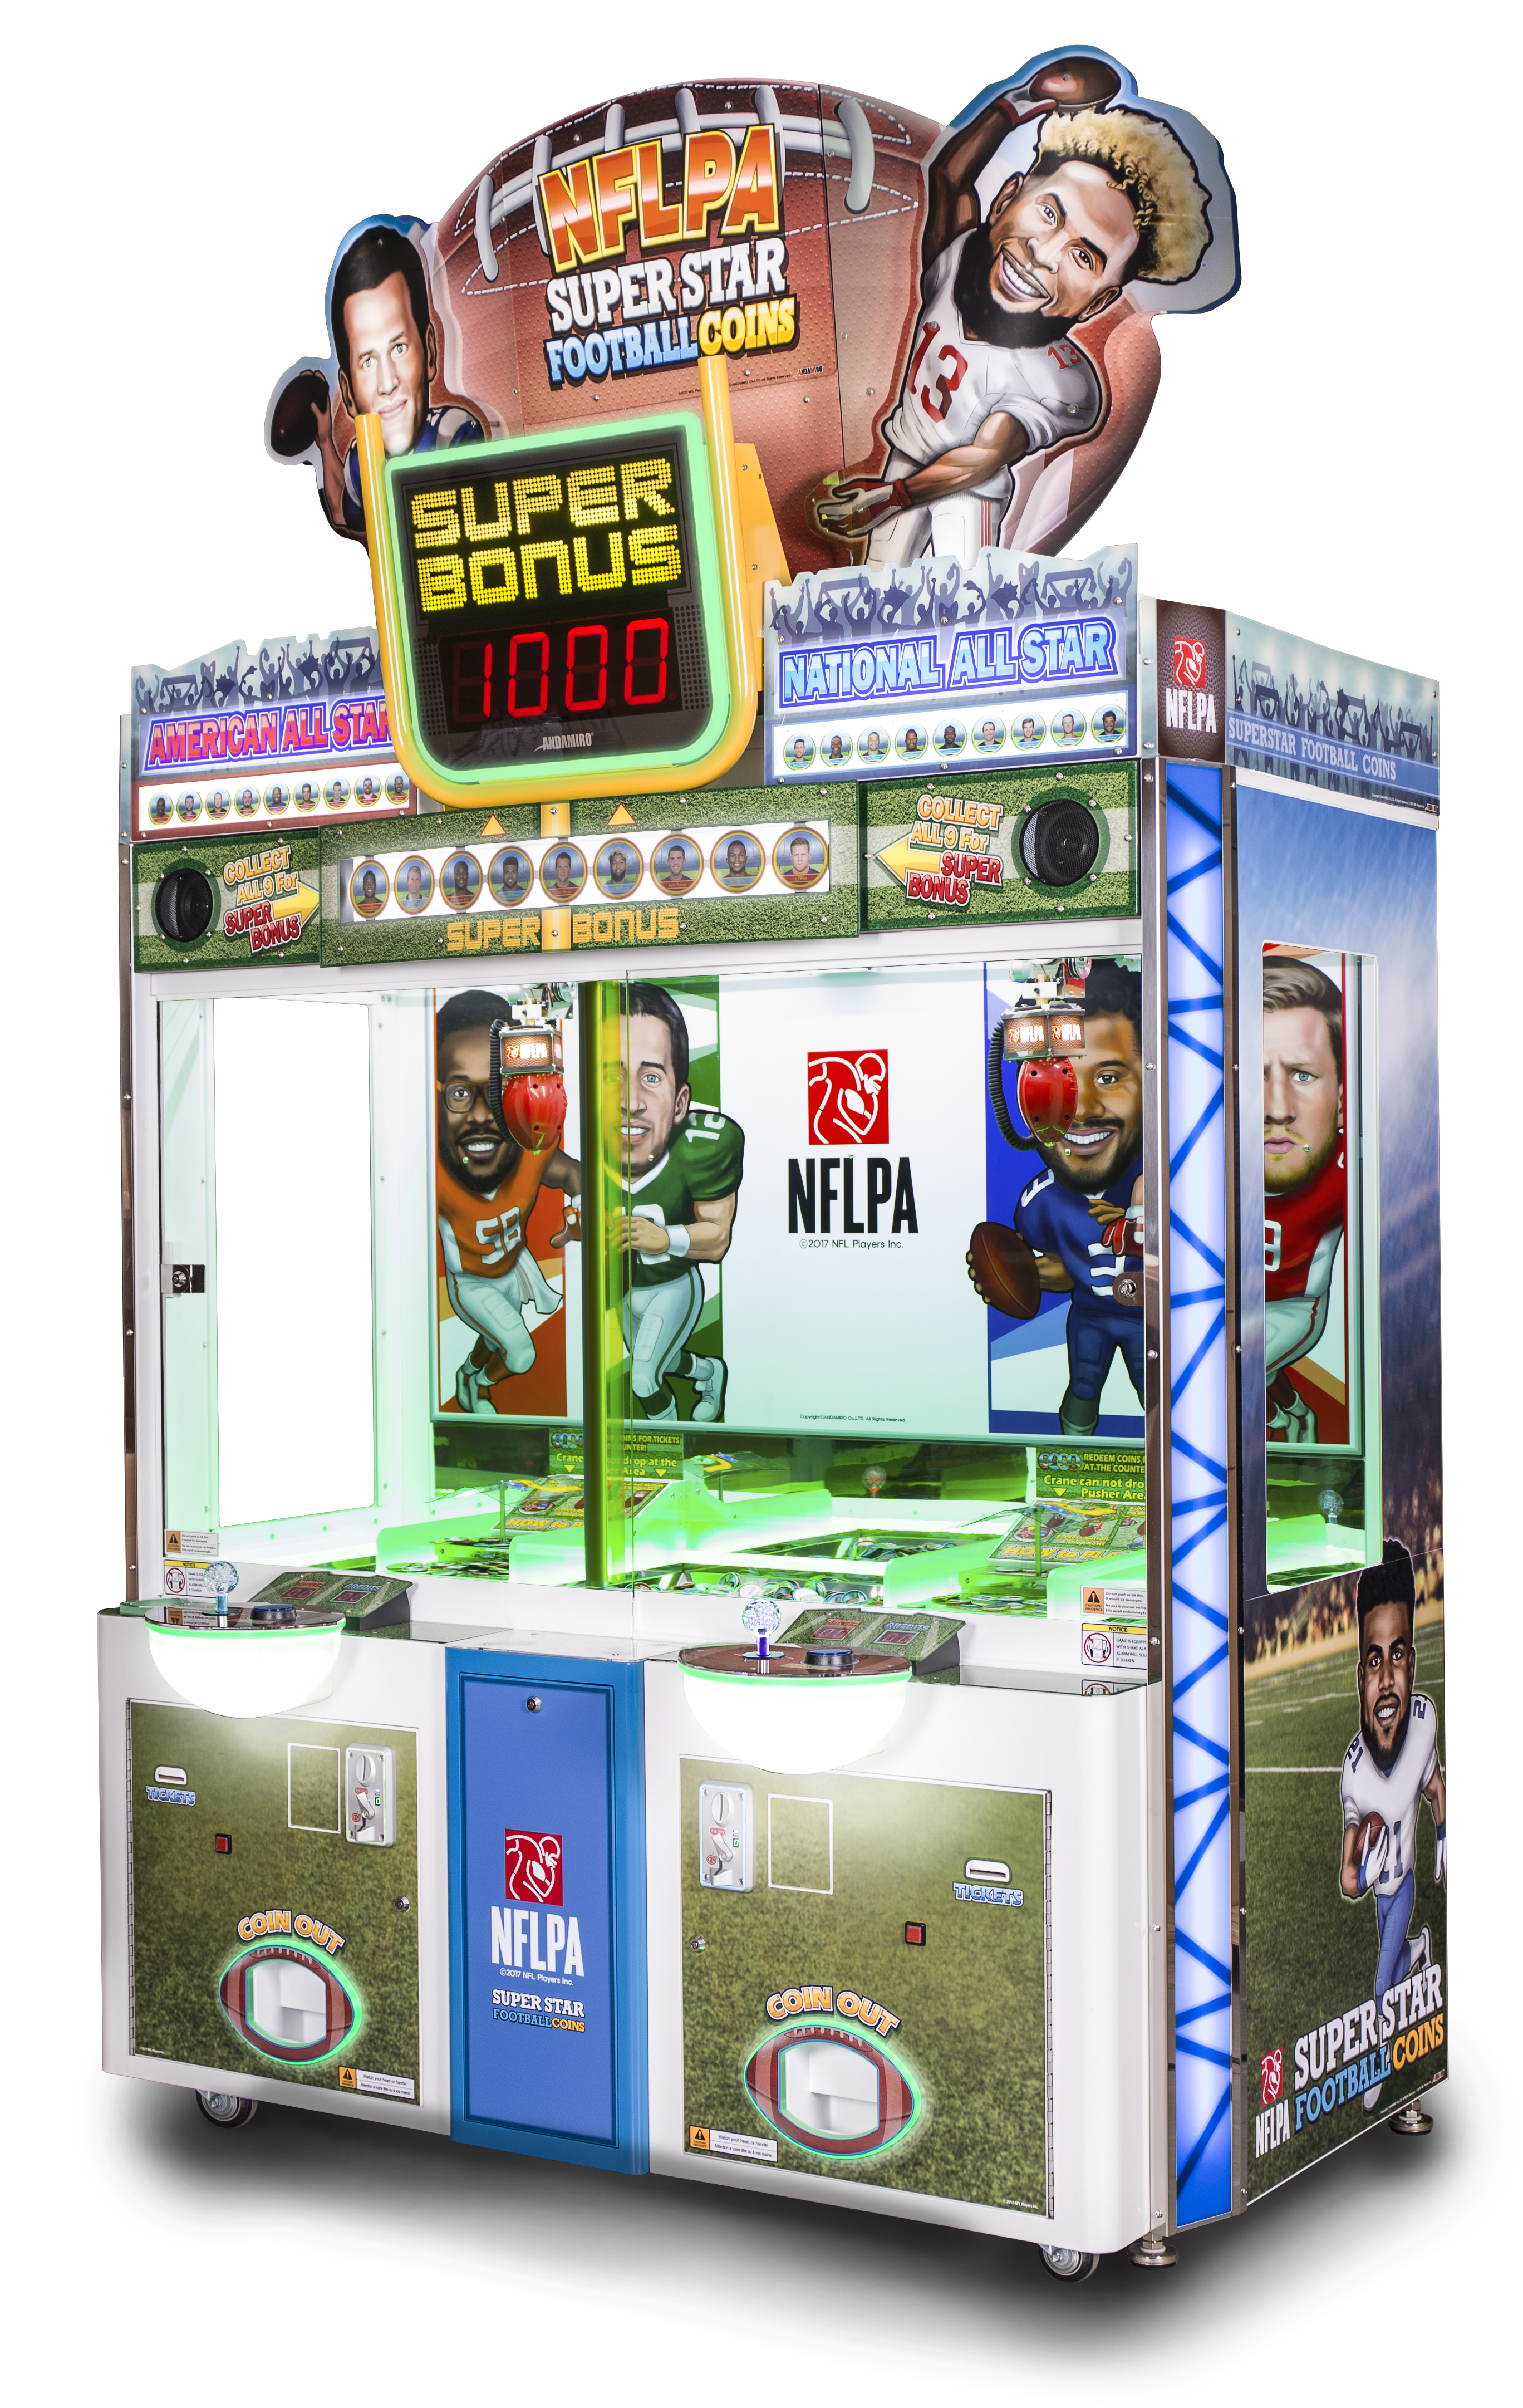 Nflpa Superstar fooball coins Pic Right